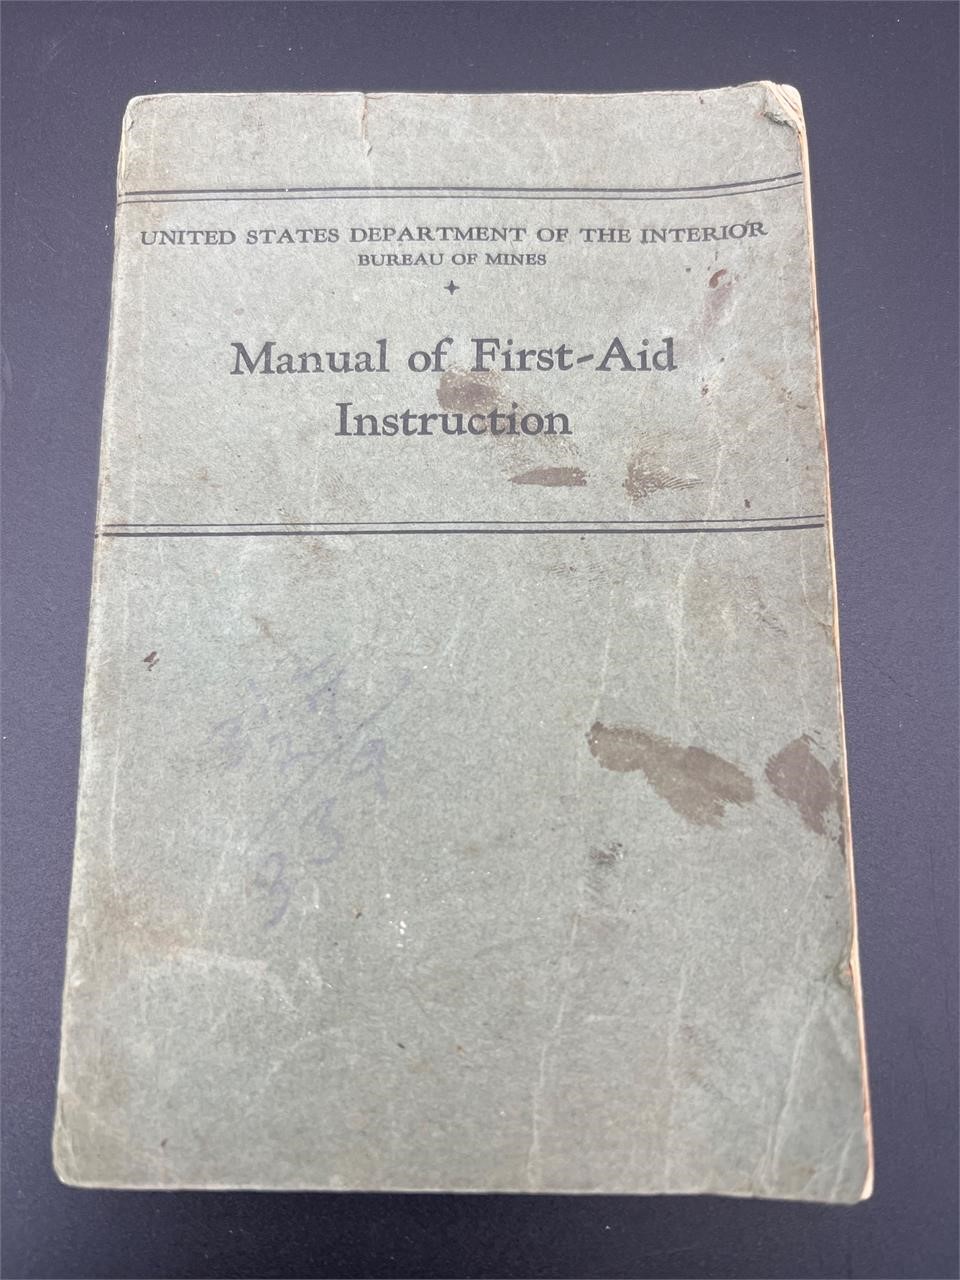 1935 Manual of first aid instruction